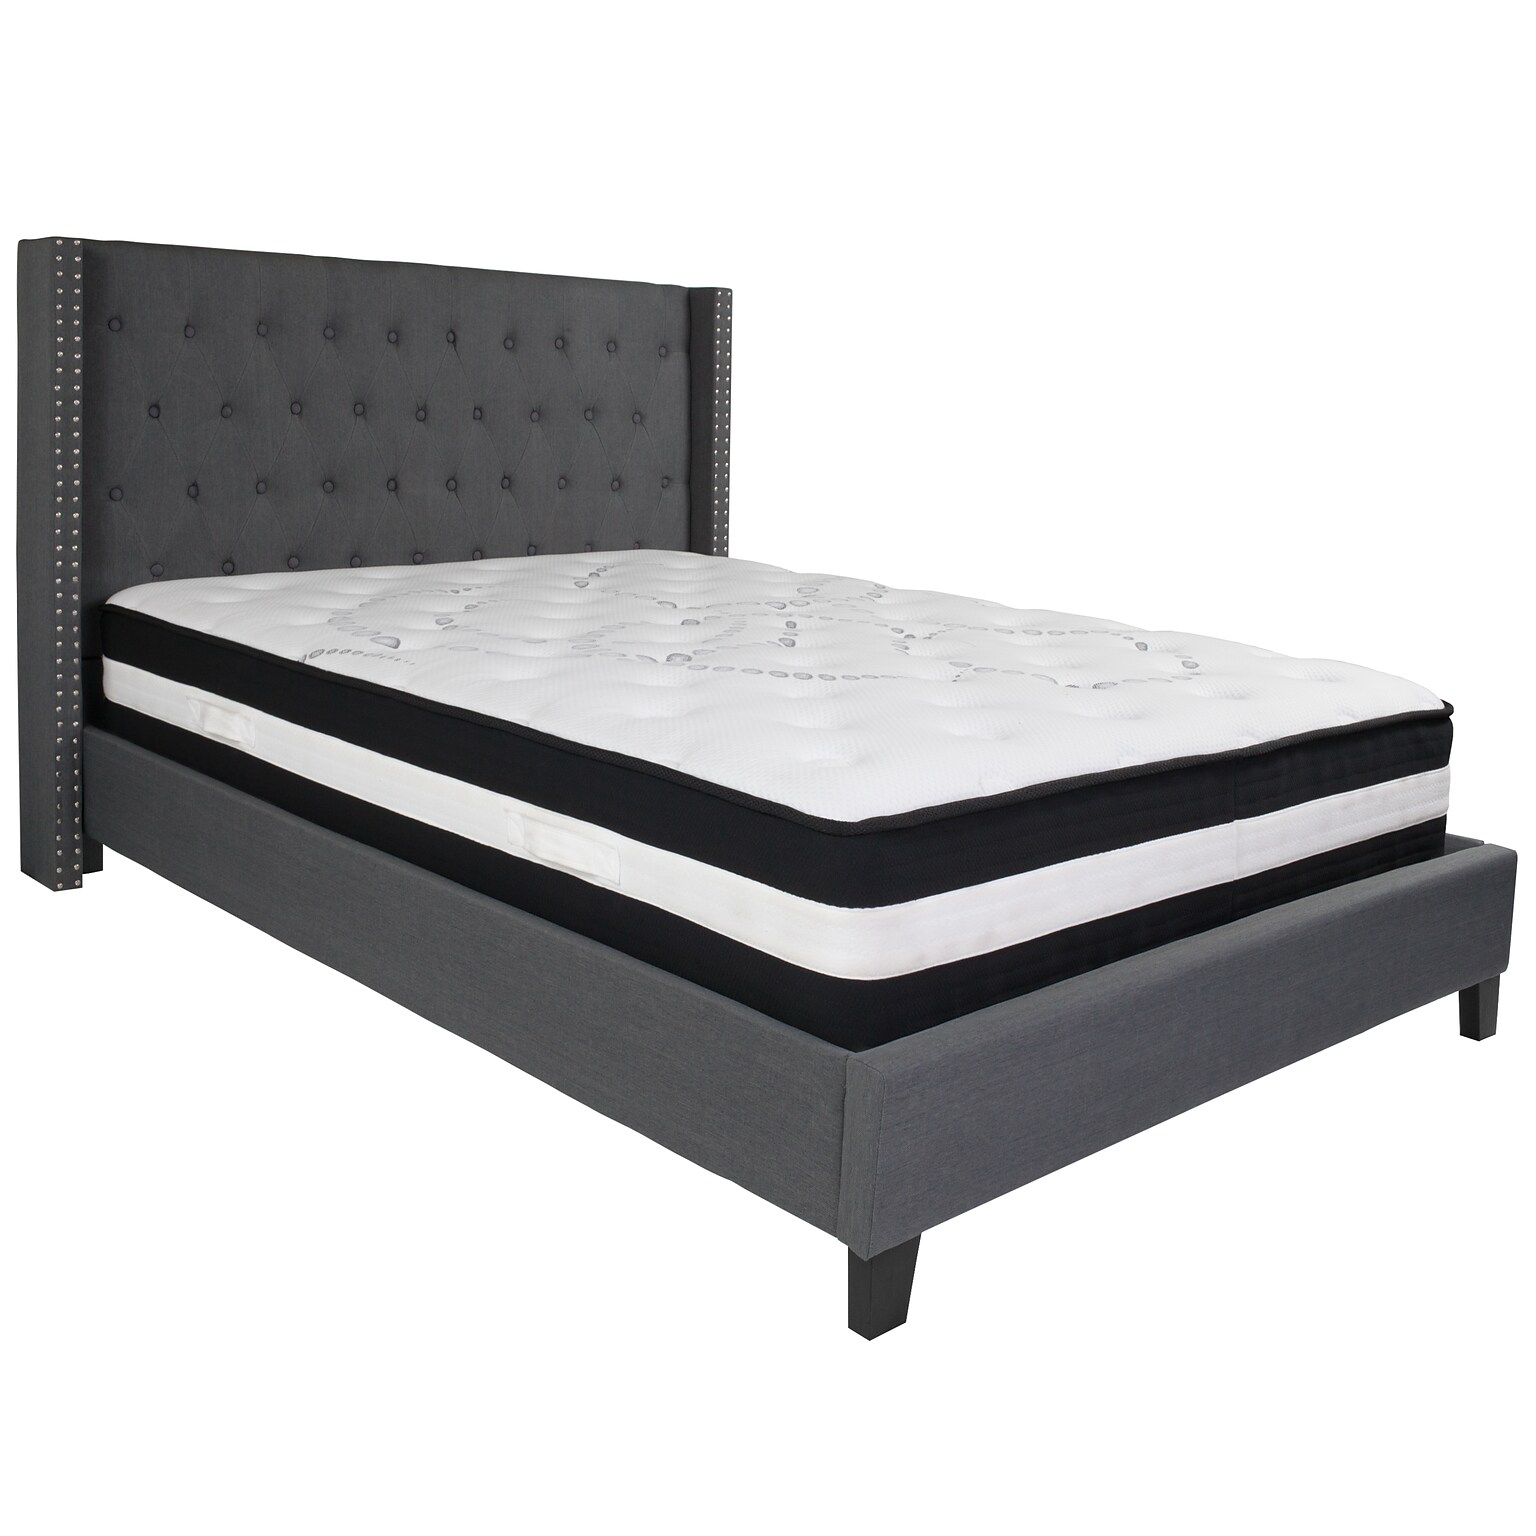 Flash Furniture Riverdale Tufted Upholstered Platform Bed in Dark Gray Fabric with Pocket Spring Mattress, Queen (HGBM47)